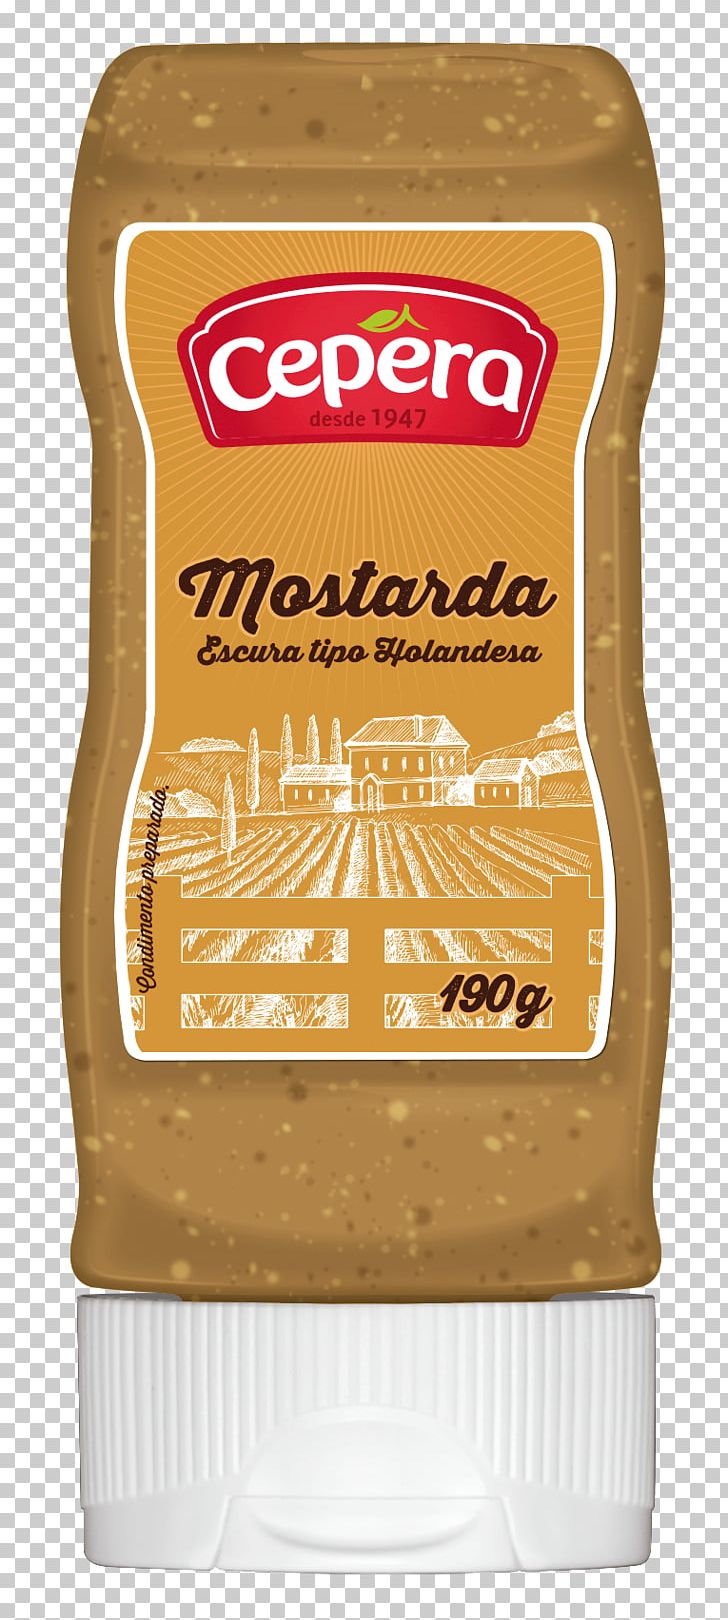 Ingredient Mustard Packaging And Labeling Lid PNG, Clipart, Electronic Arts, Flavor, Ingredient, Lid, Mostarda Free PNG Download